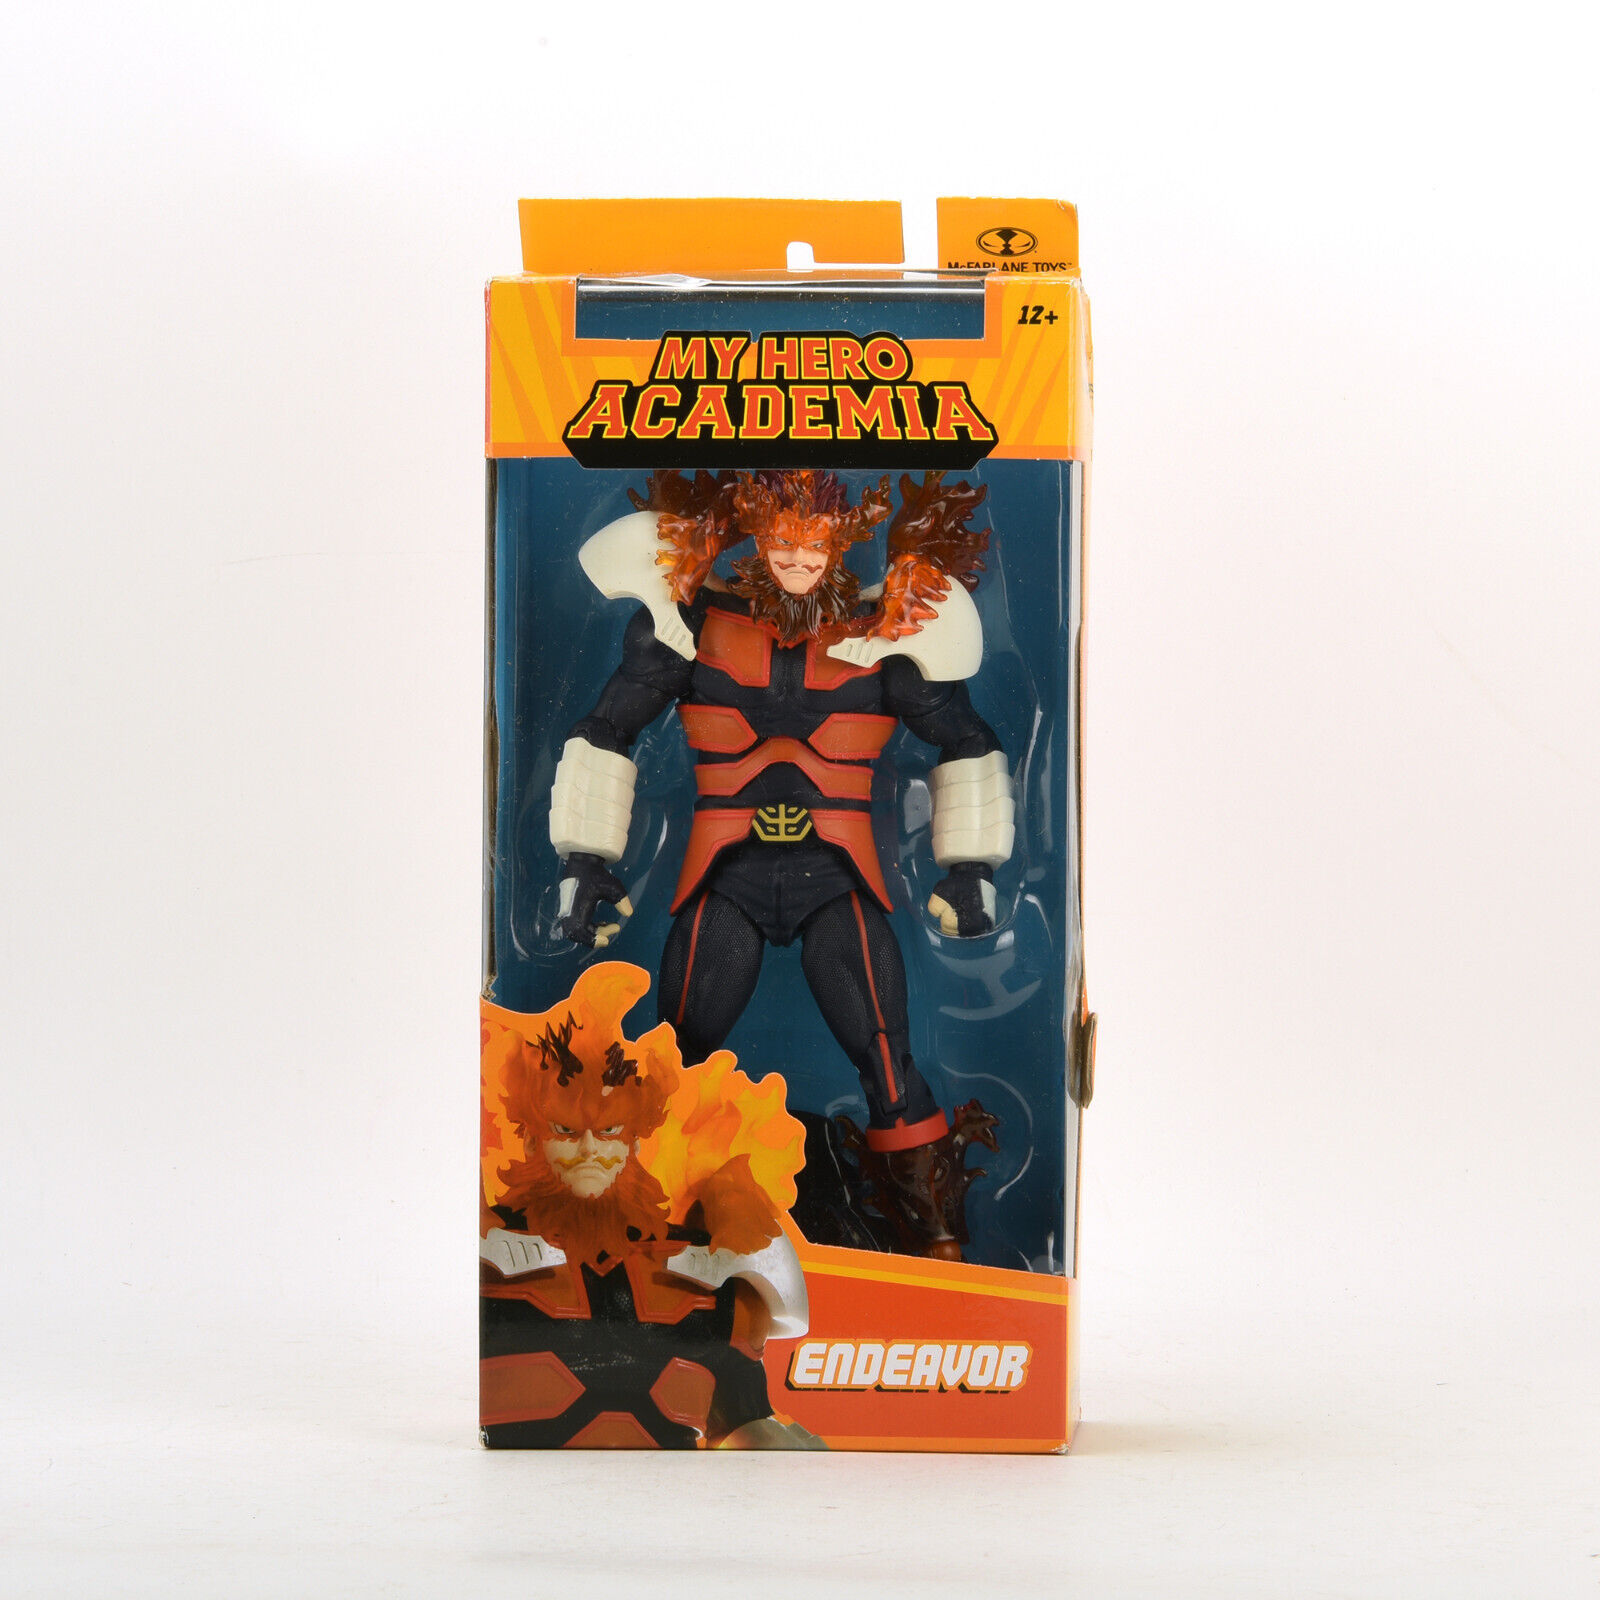 McFarlane Toys My Hero Academia Endeavor 7 inch Action Figure New in Box Gift